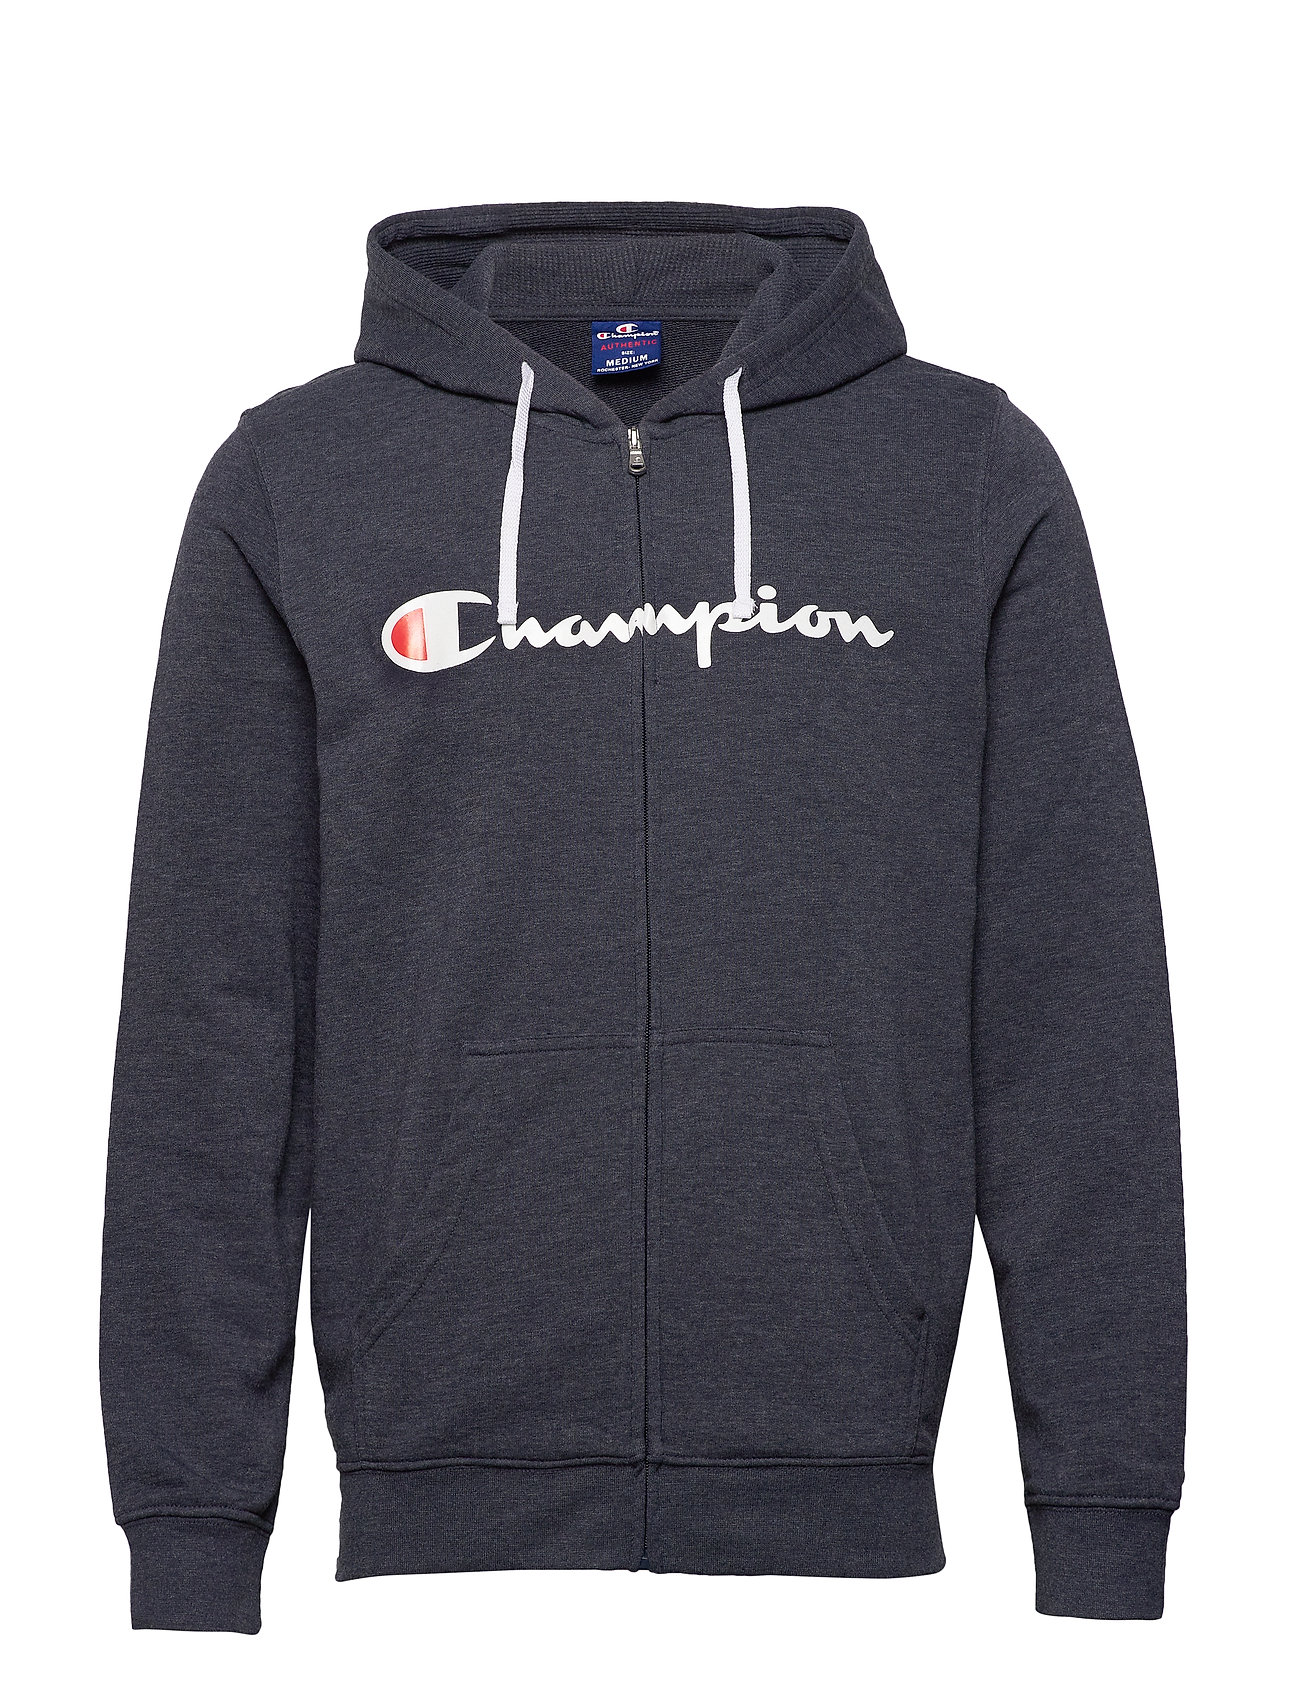 champions clothing outlet